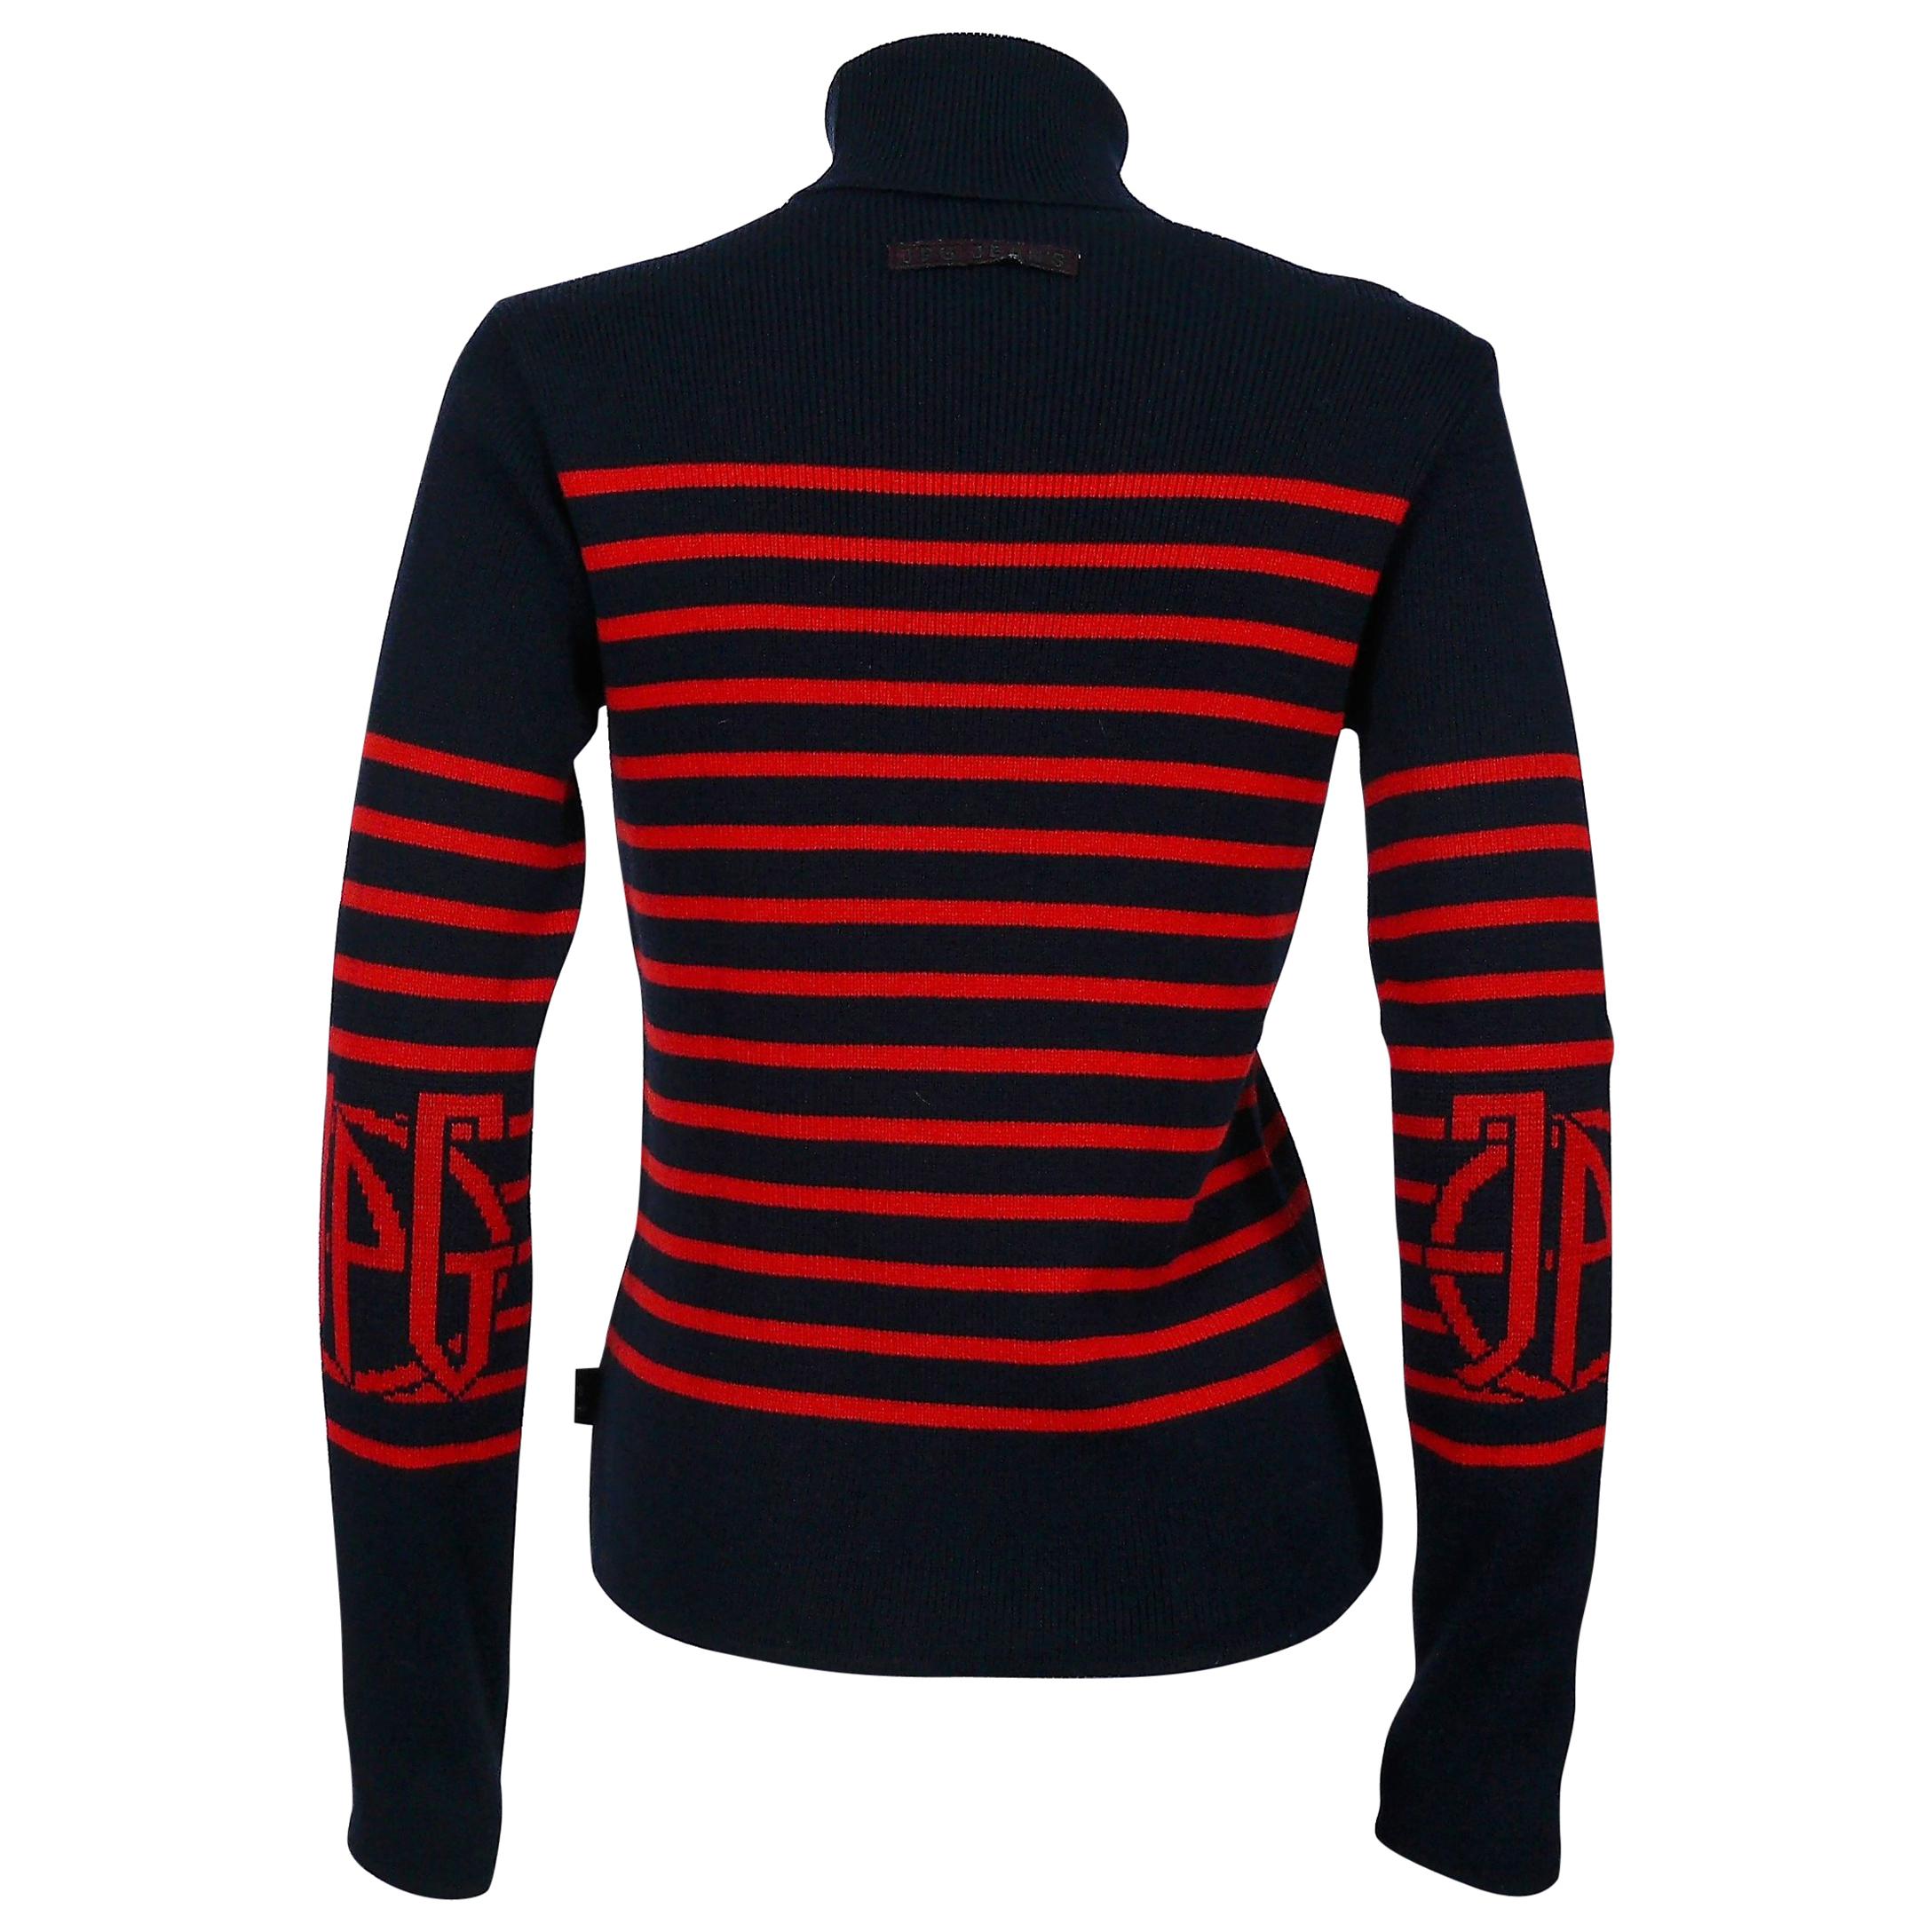 Jean Paul Gaultier Vintage Iconic Matelot Navy Blue Red Sweater US Size 8